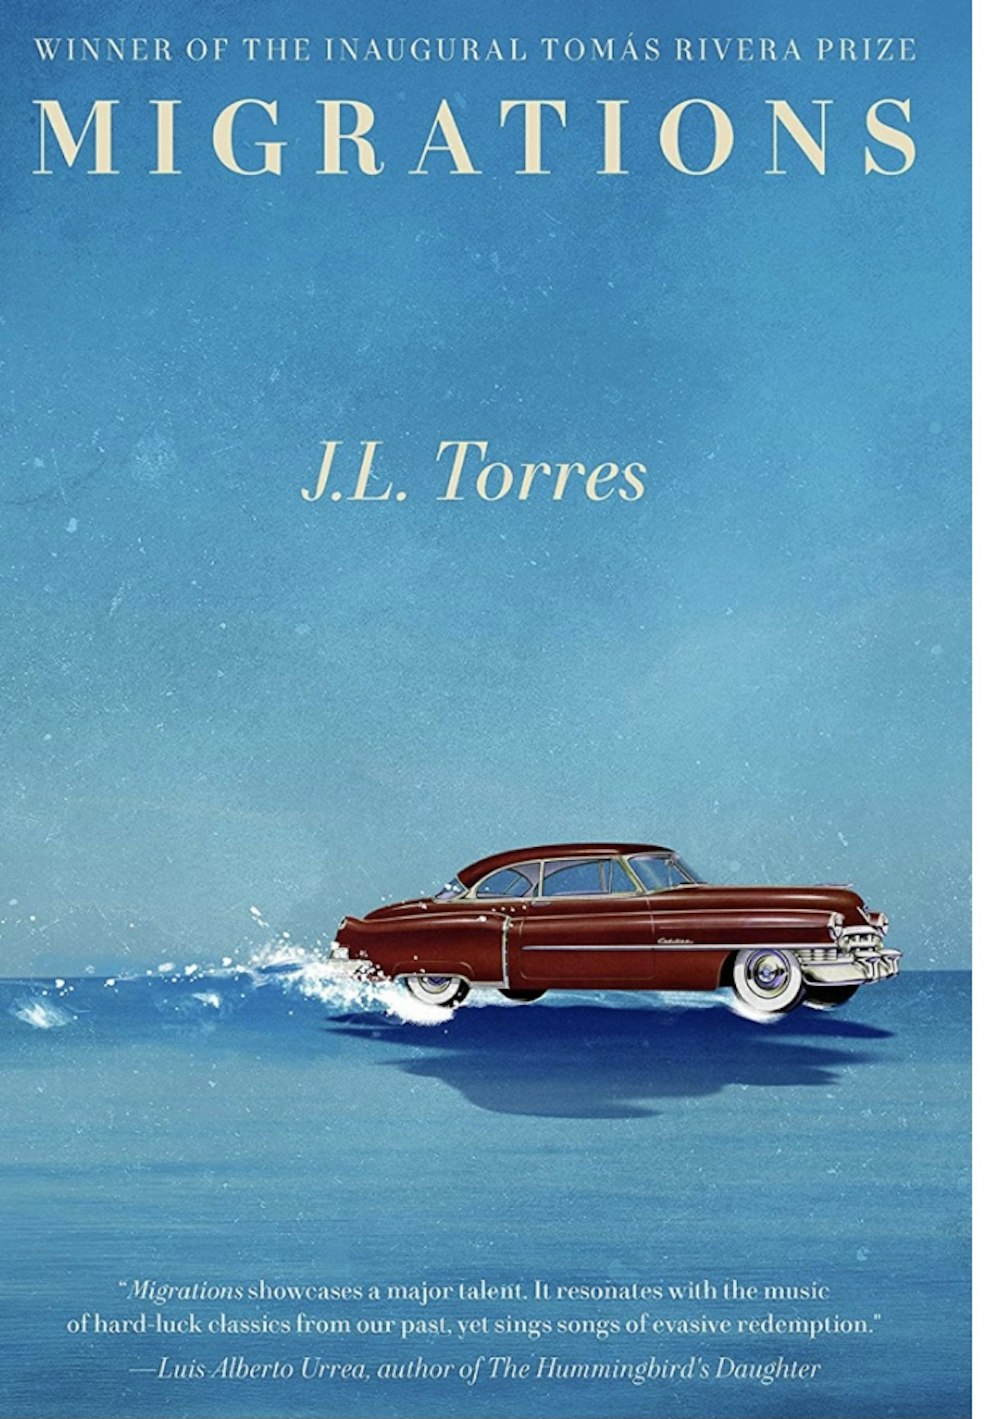 Migrations by J.L. Torres - a Blogpost preview of our upcoming author interview.